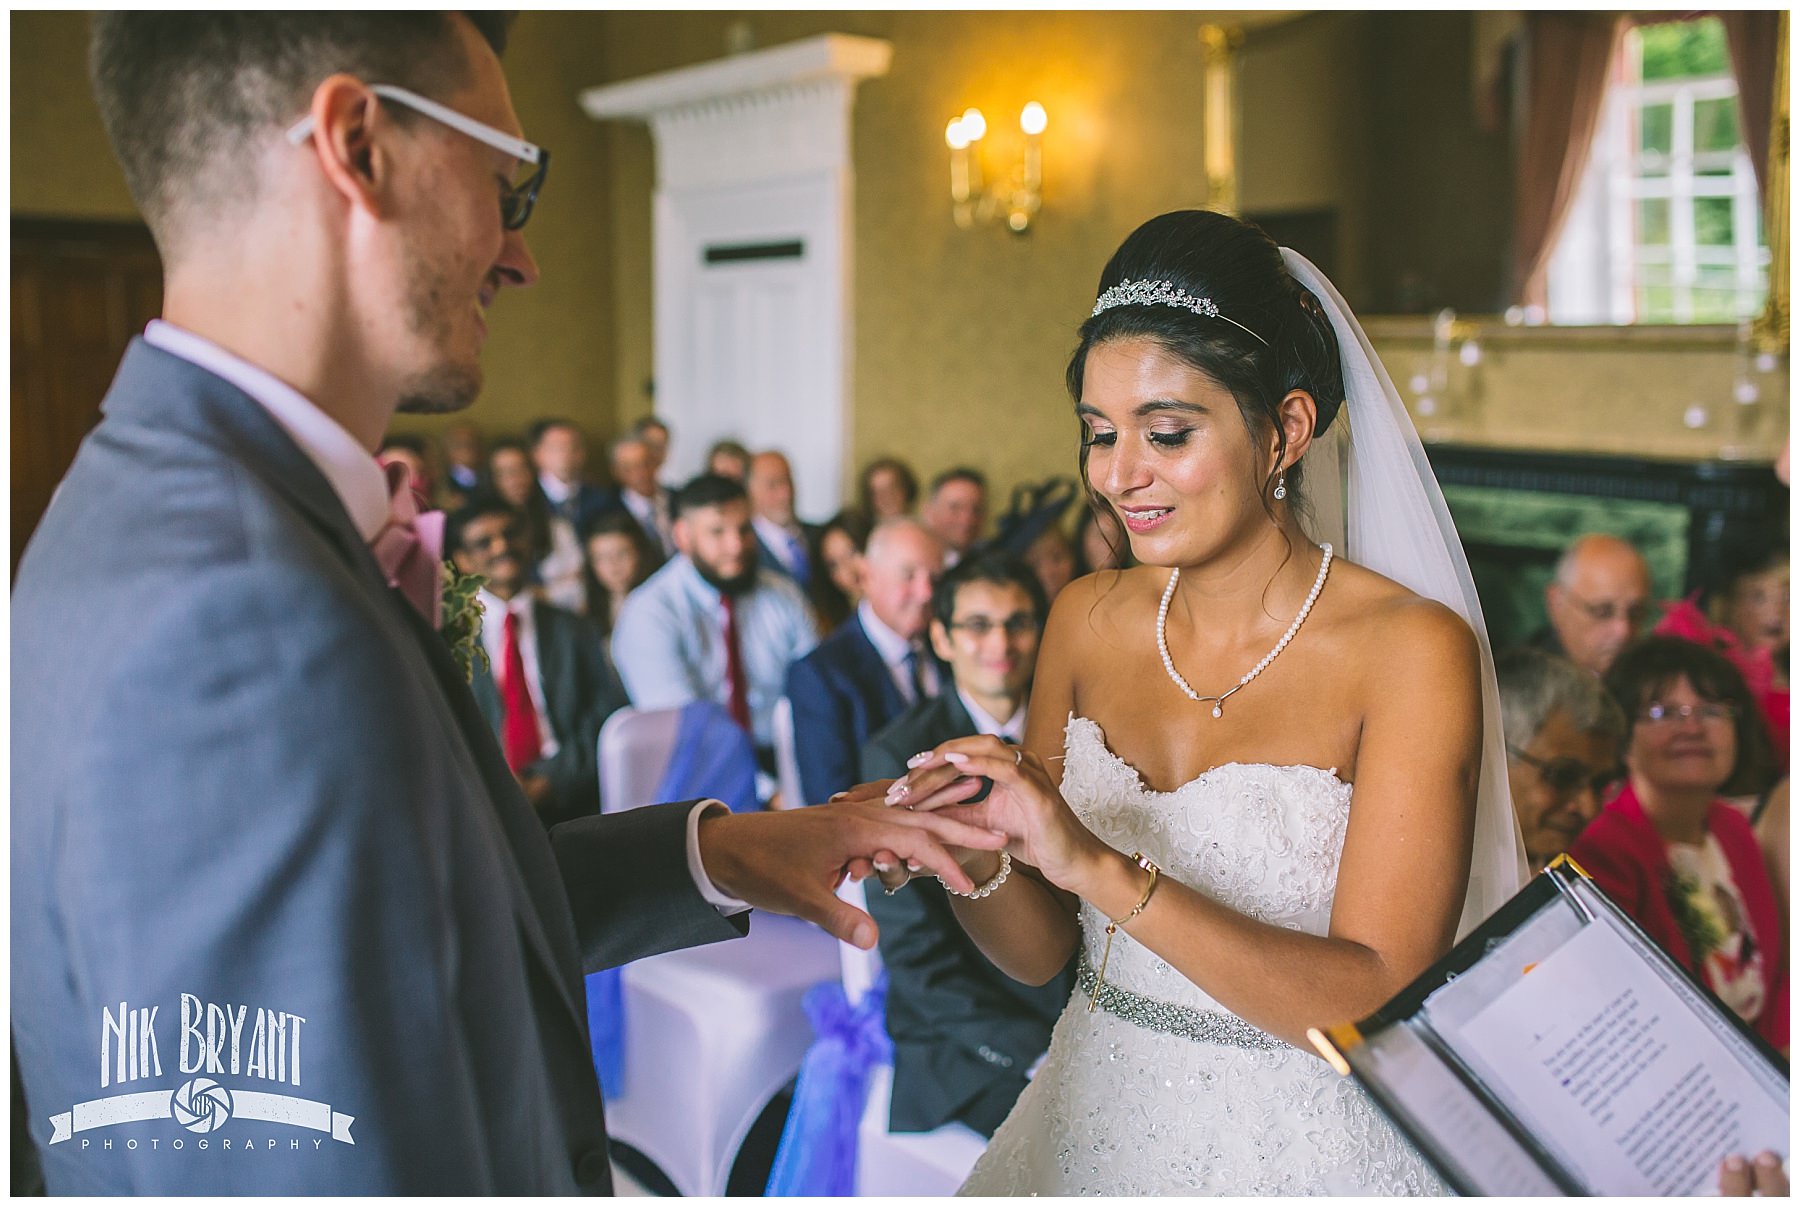 bride gives groom wedding ring during ceremony